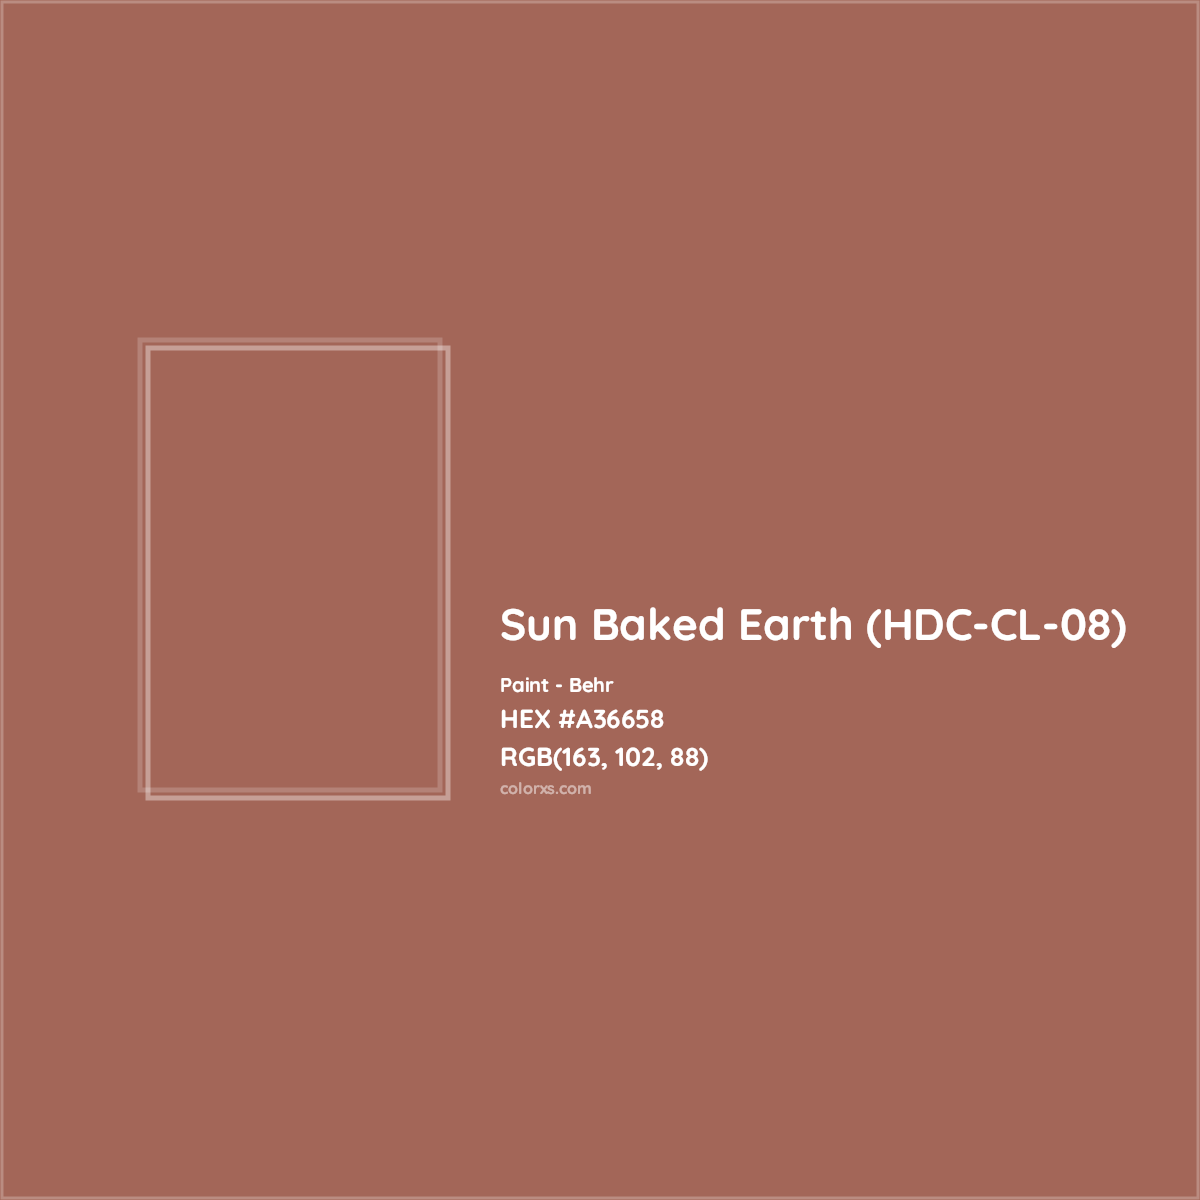 HEX #A36658 Sun Baked Earth (HDC-CL-08) Paint Behr - Color Code